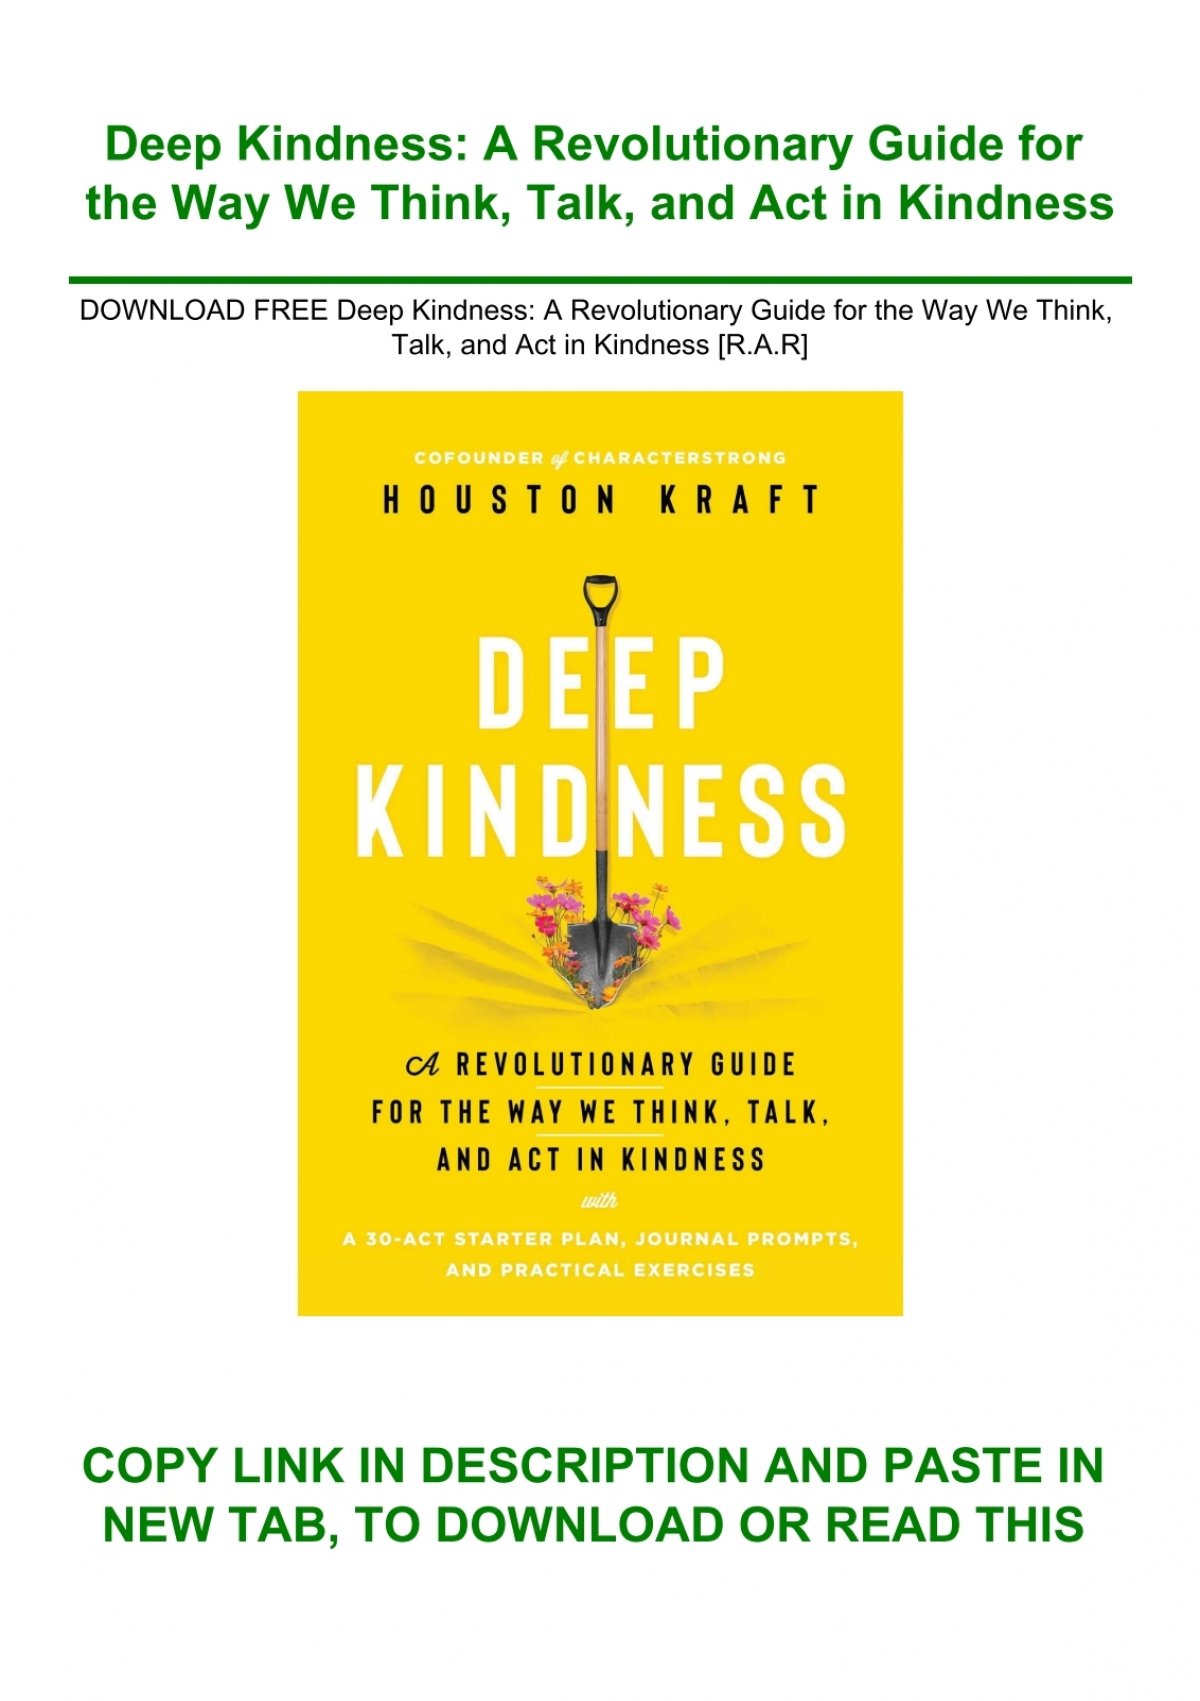 Deep Kindness: A Revolutionary Guide for the Way We Think, Talk, and Act in  Kindness by Houston Kraft